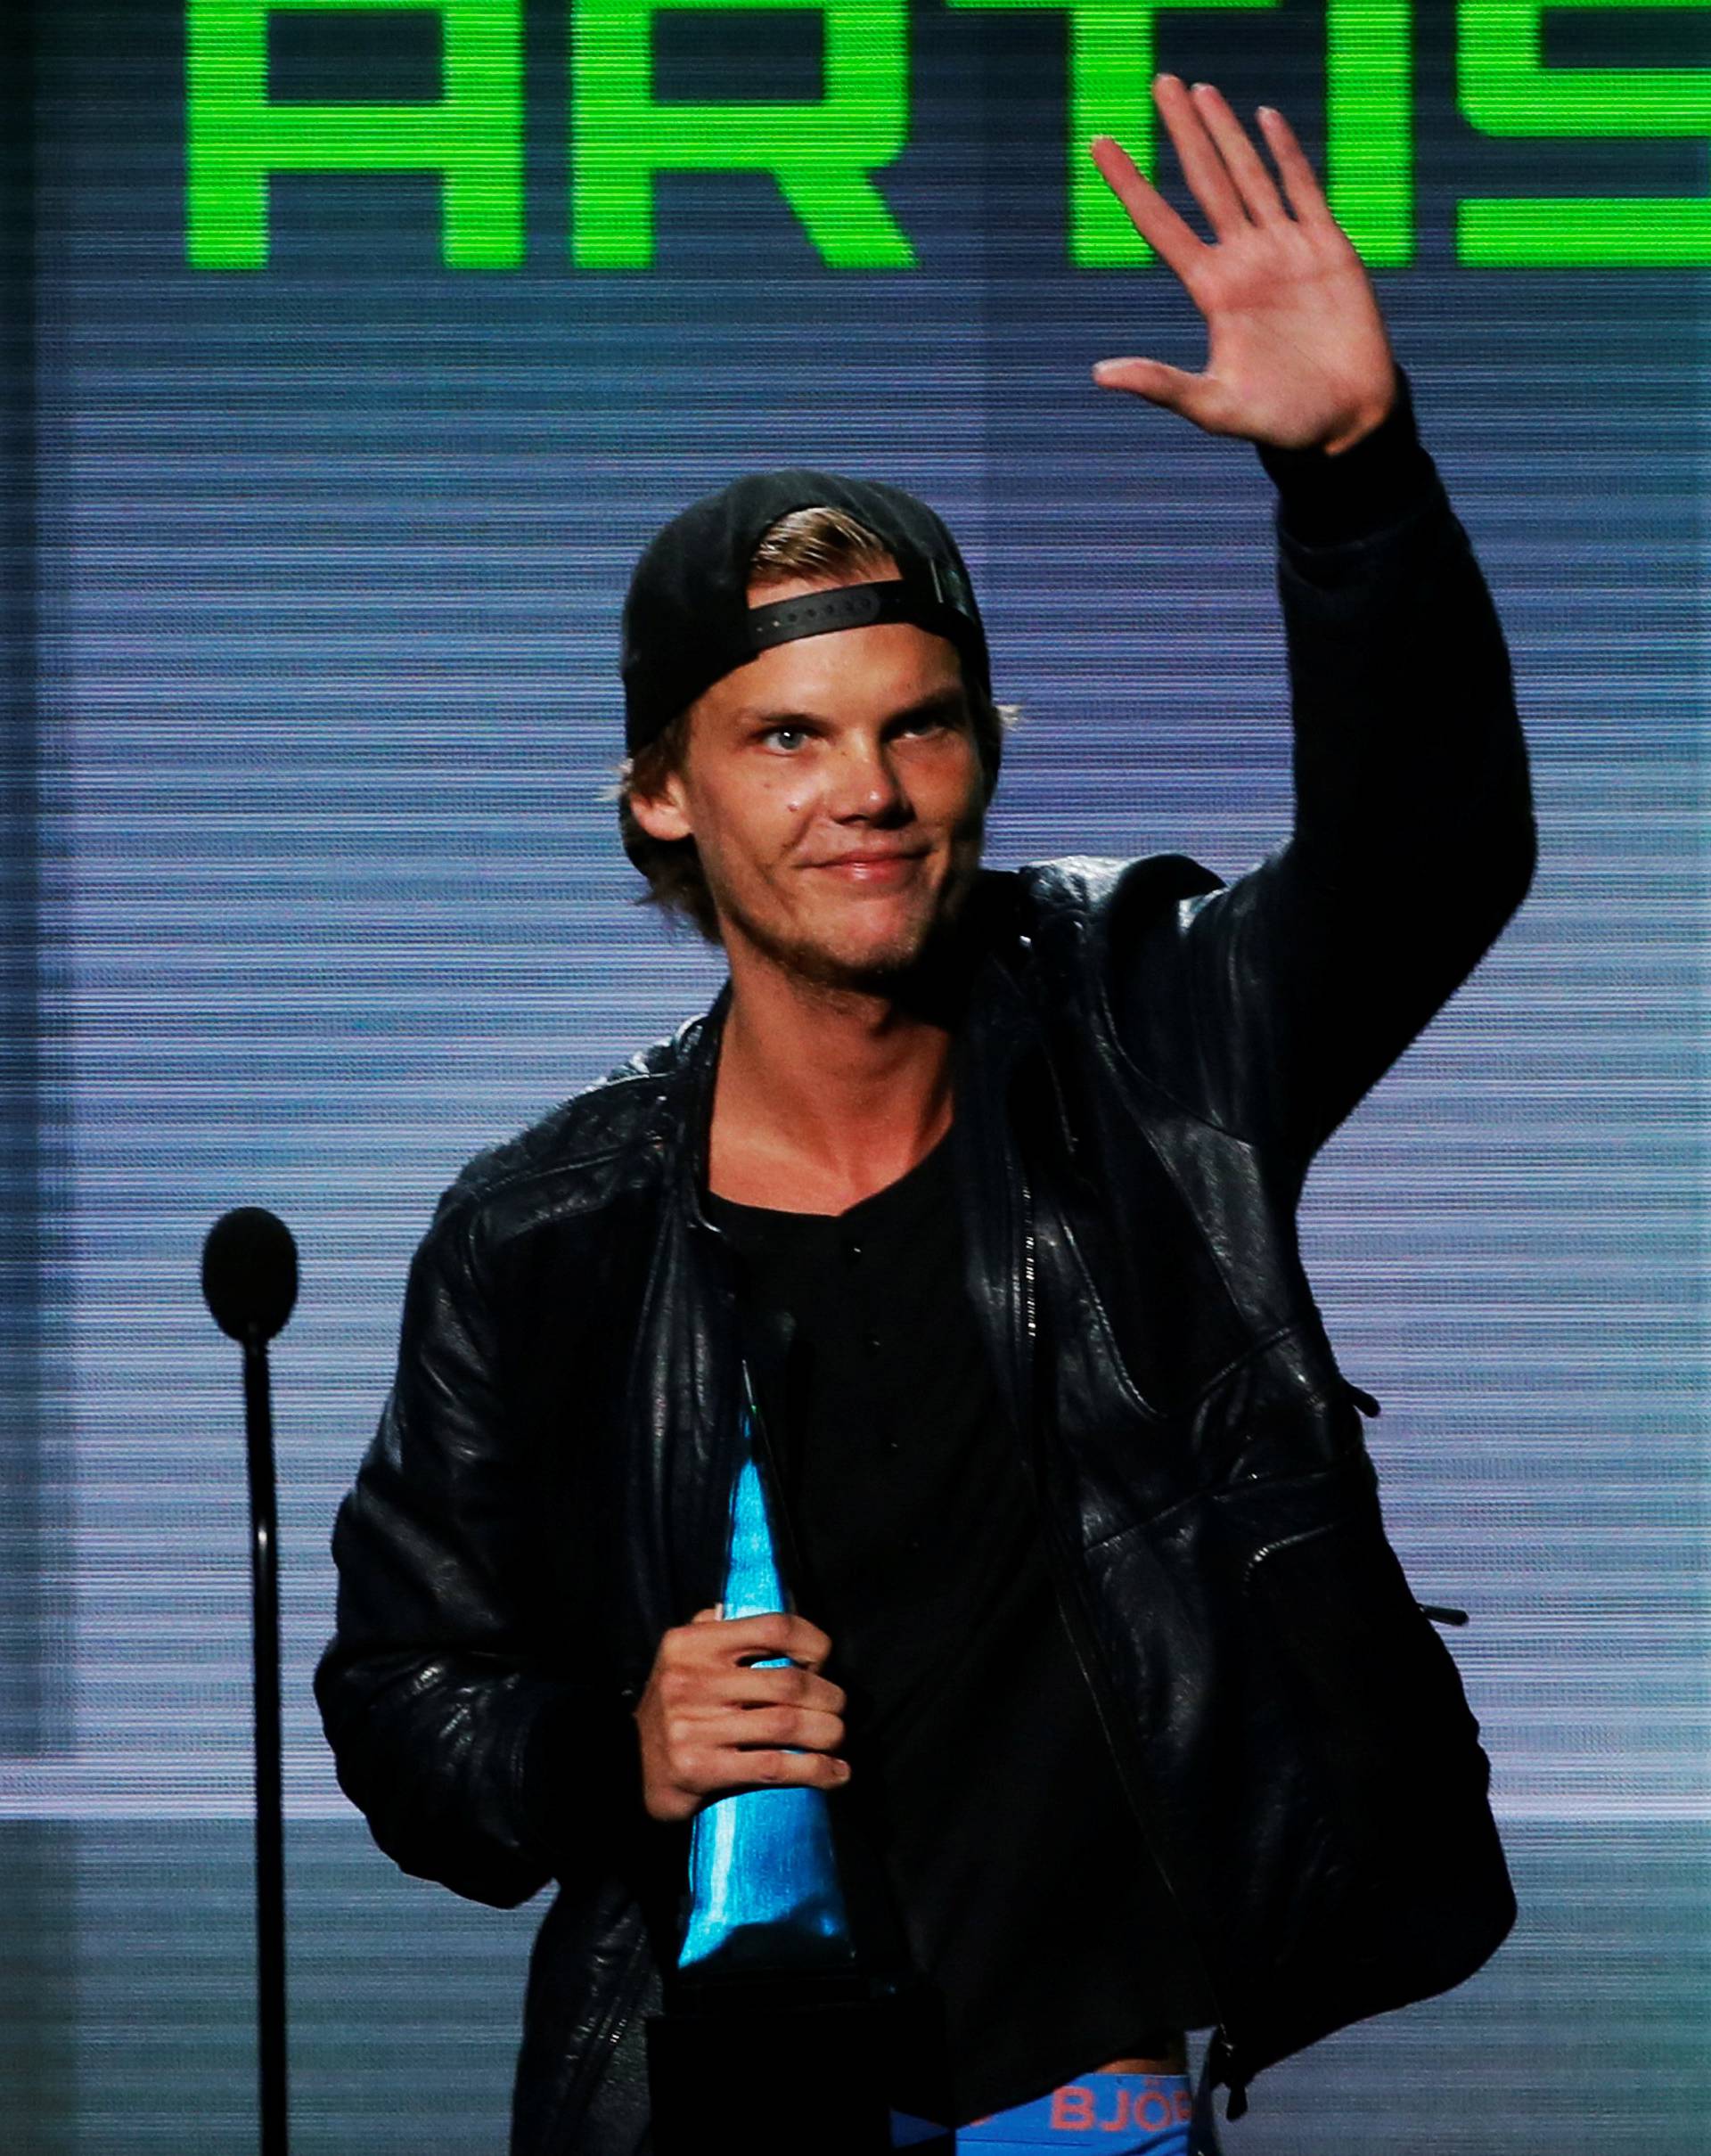 FILE PHOTO: Avicii accepts the favorite electronic dance music artist award at the 41st American Music Awards in Los Angeles